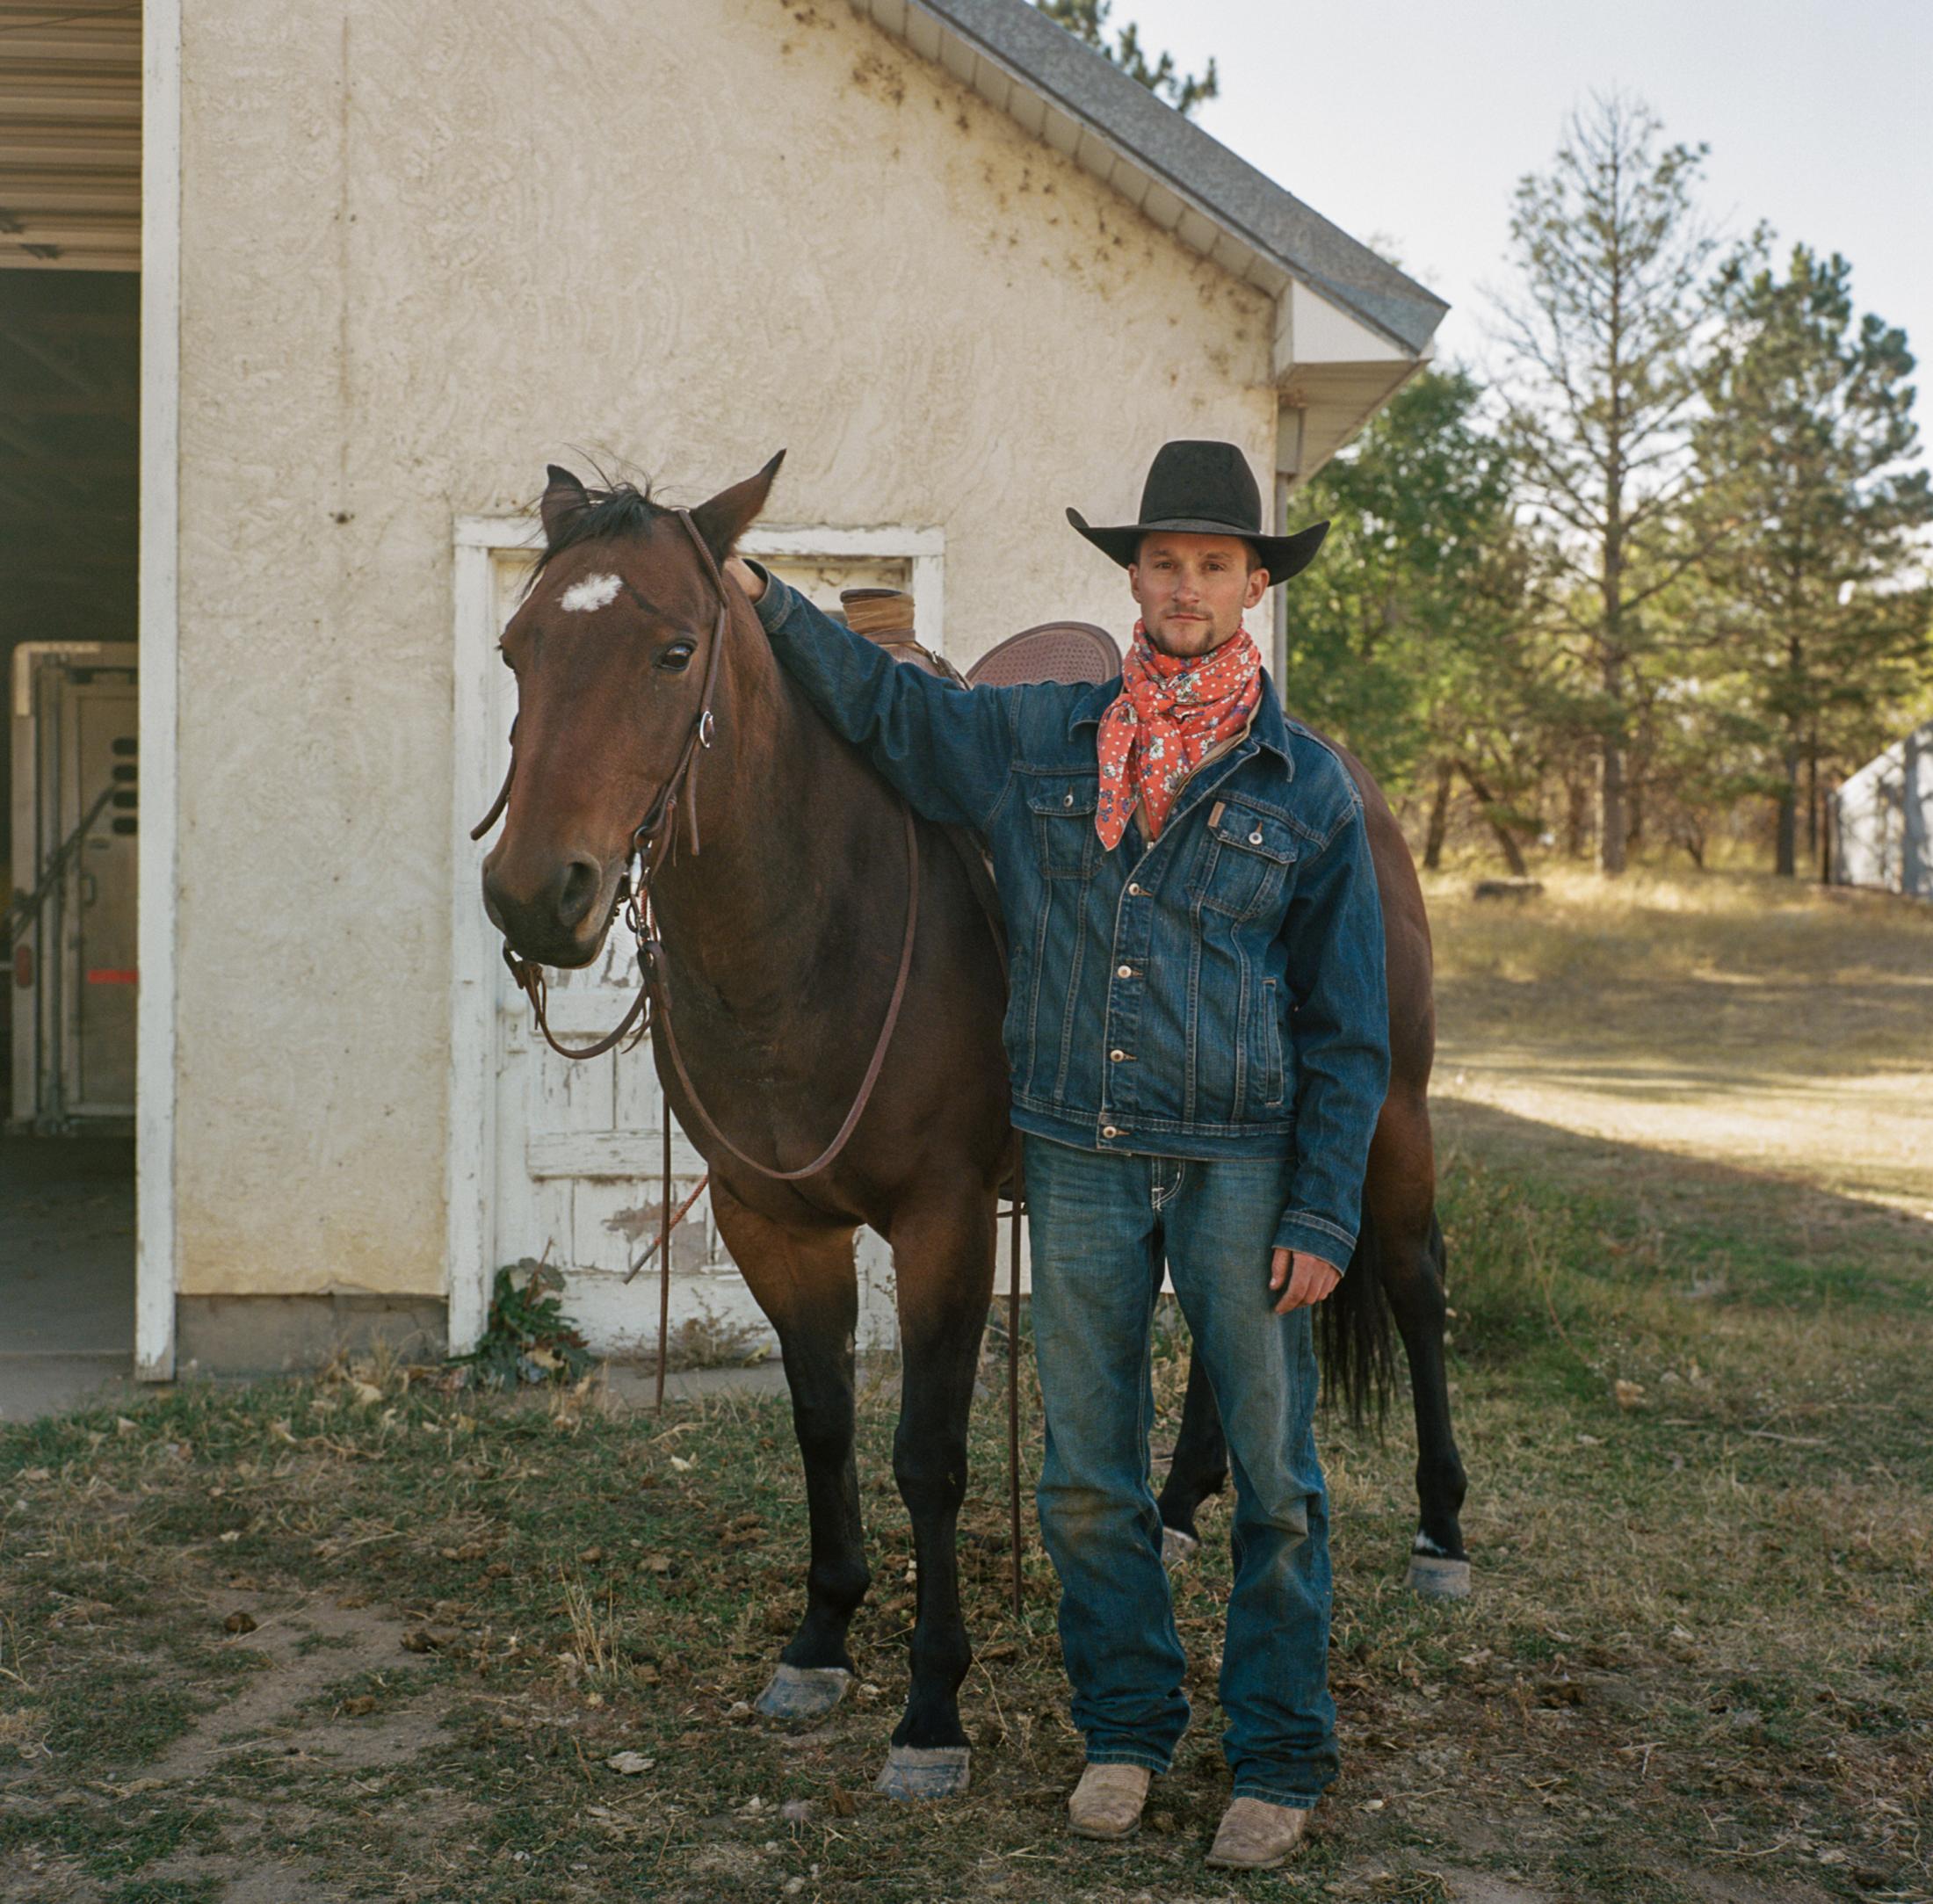 Along the Keystone XL Pipeline, Hoping for a Miracle - Spencer Wahl, 25, from Wyoming, a rider working on the...